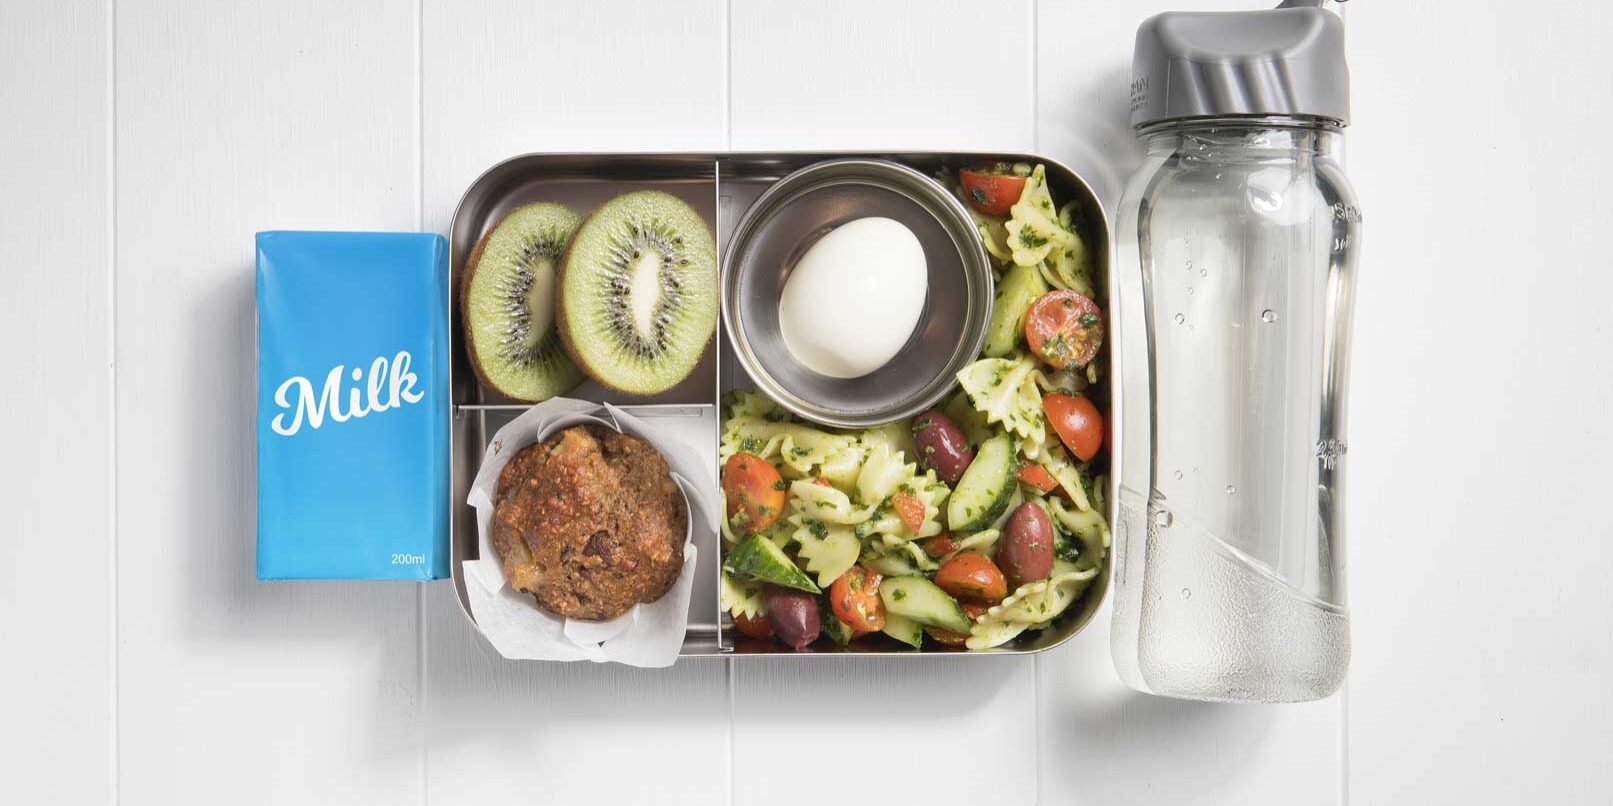 Top view of packed lunch box with salad, muffin, egg, kiwifruit, milk popper and a water bottle.